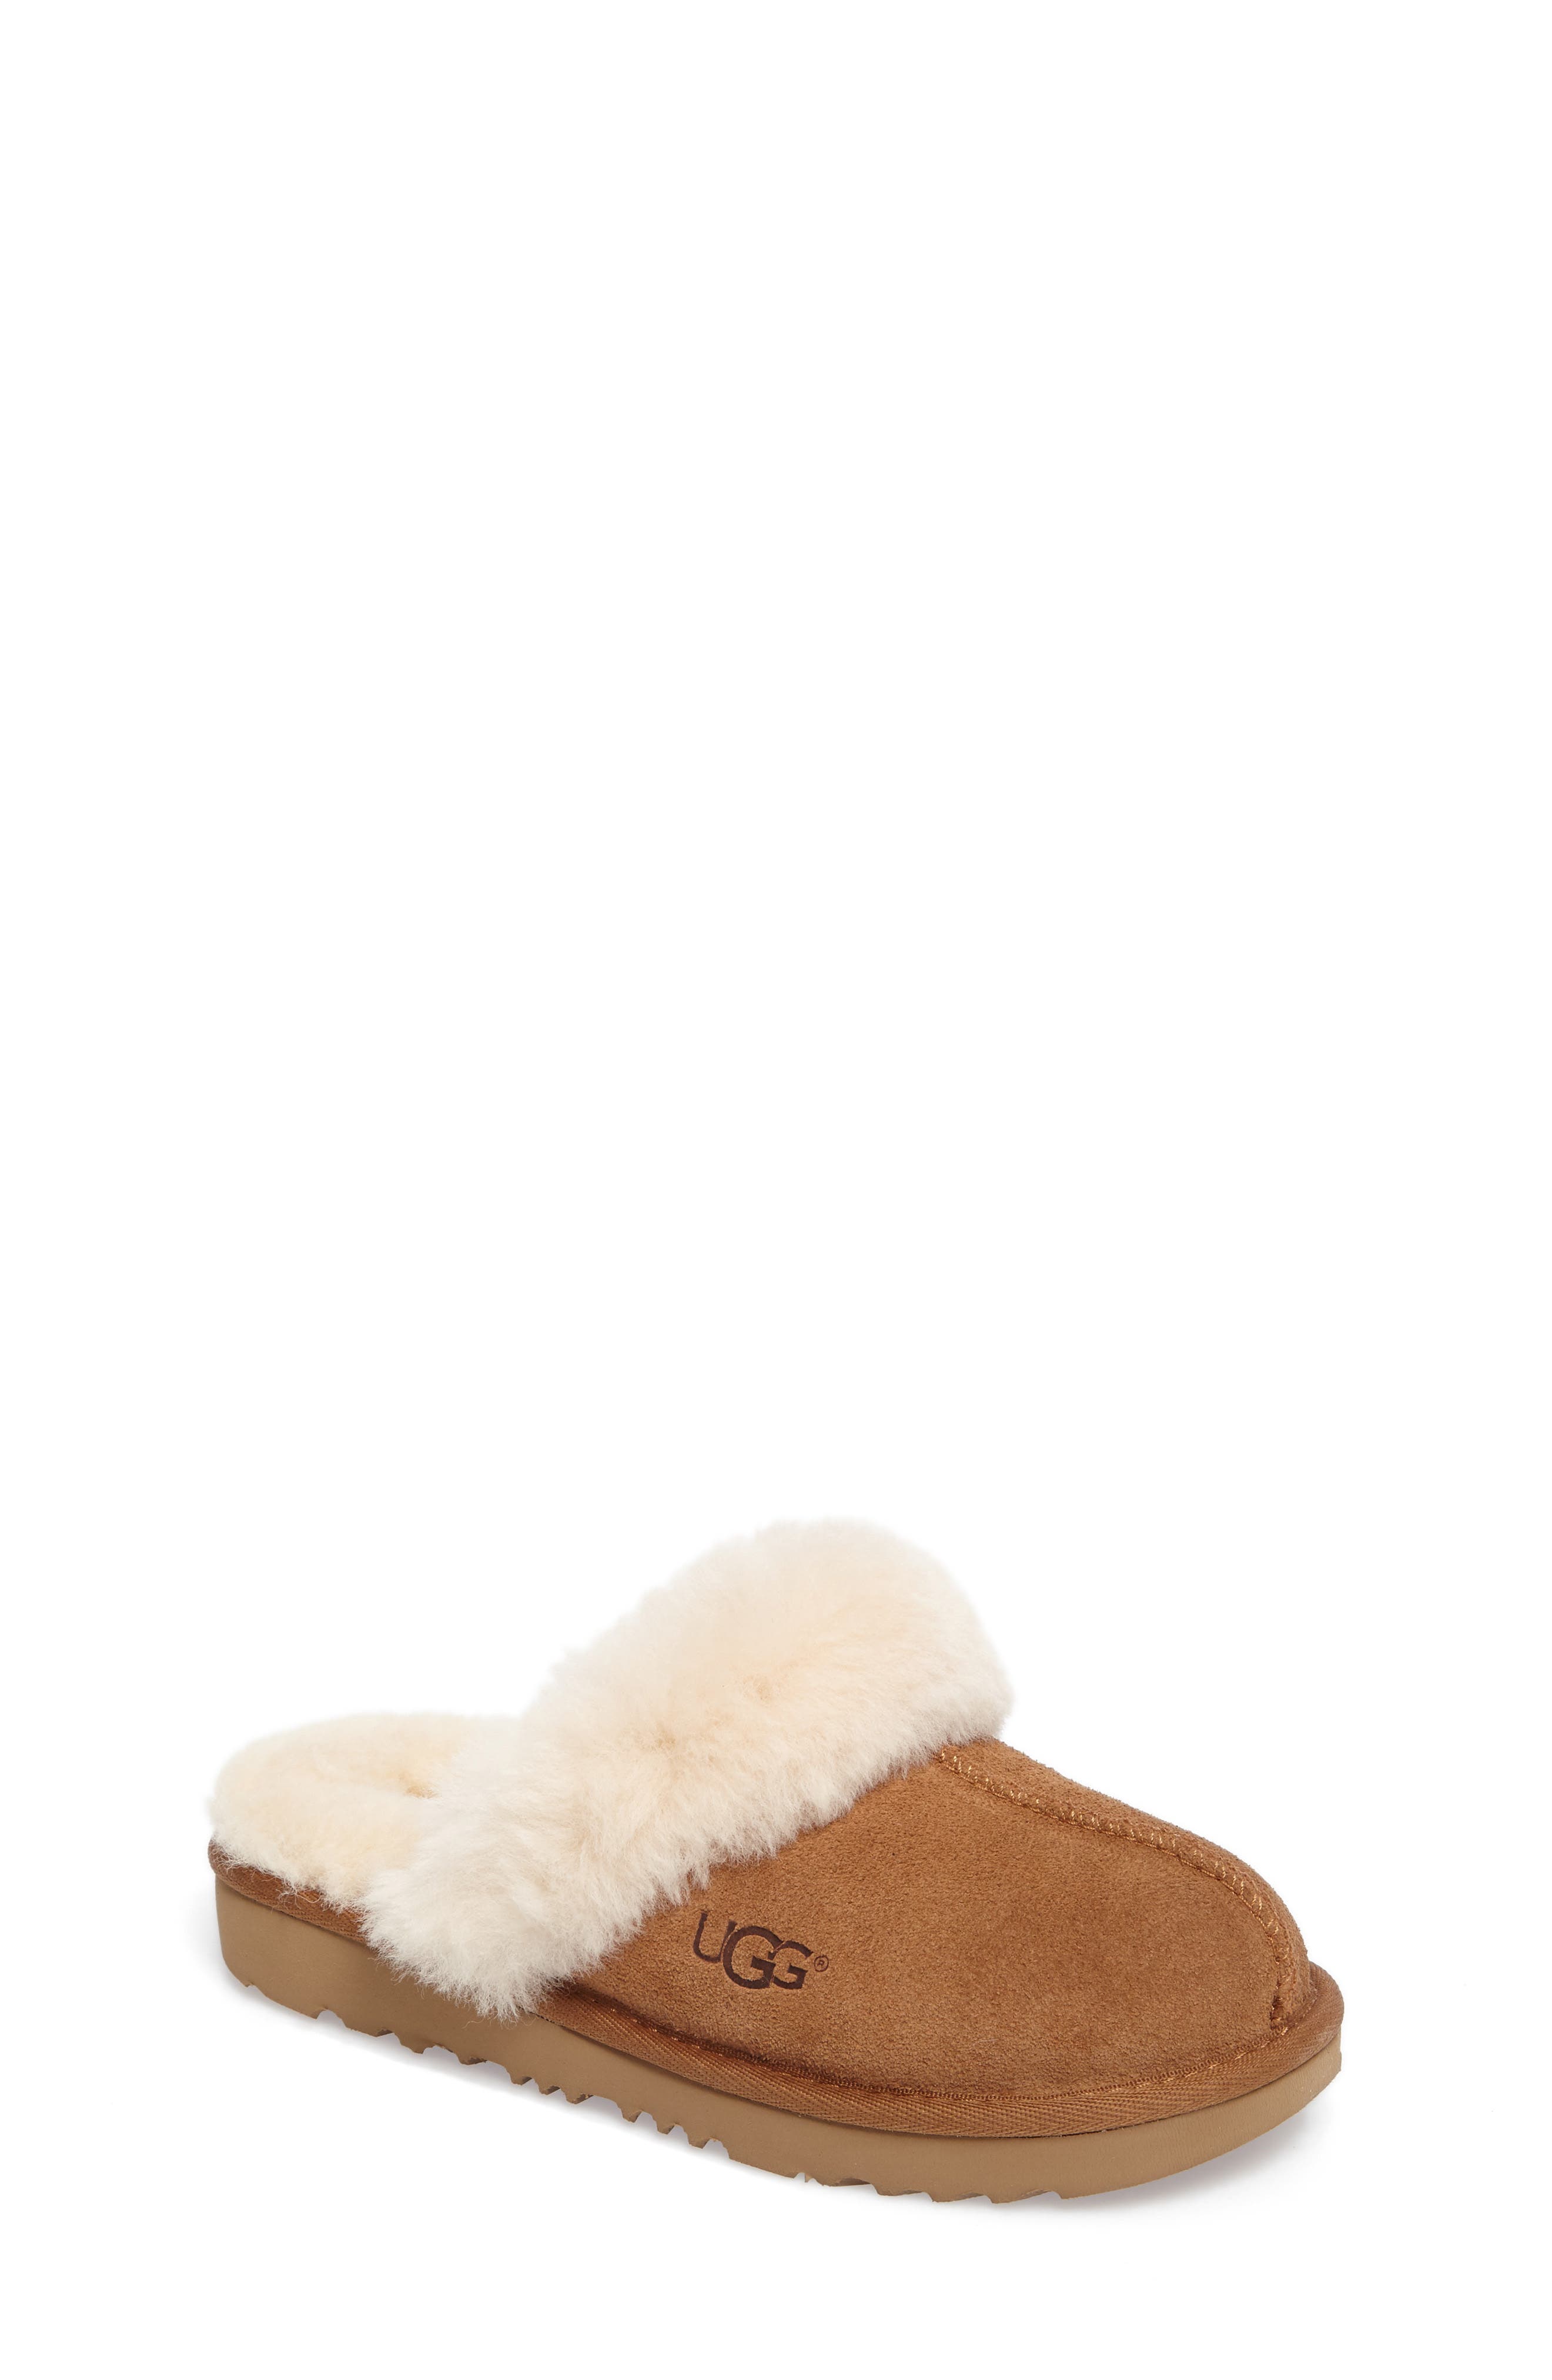 kids ugg boots size 5